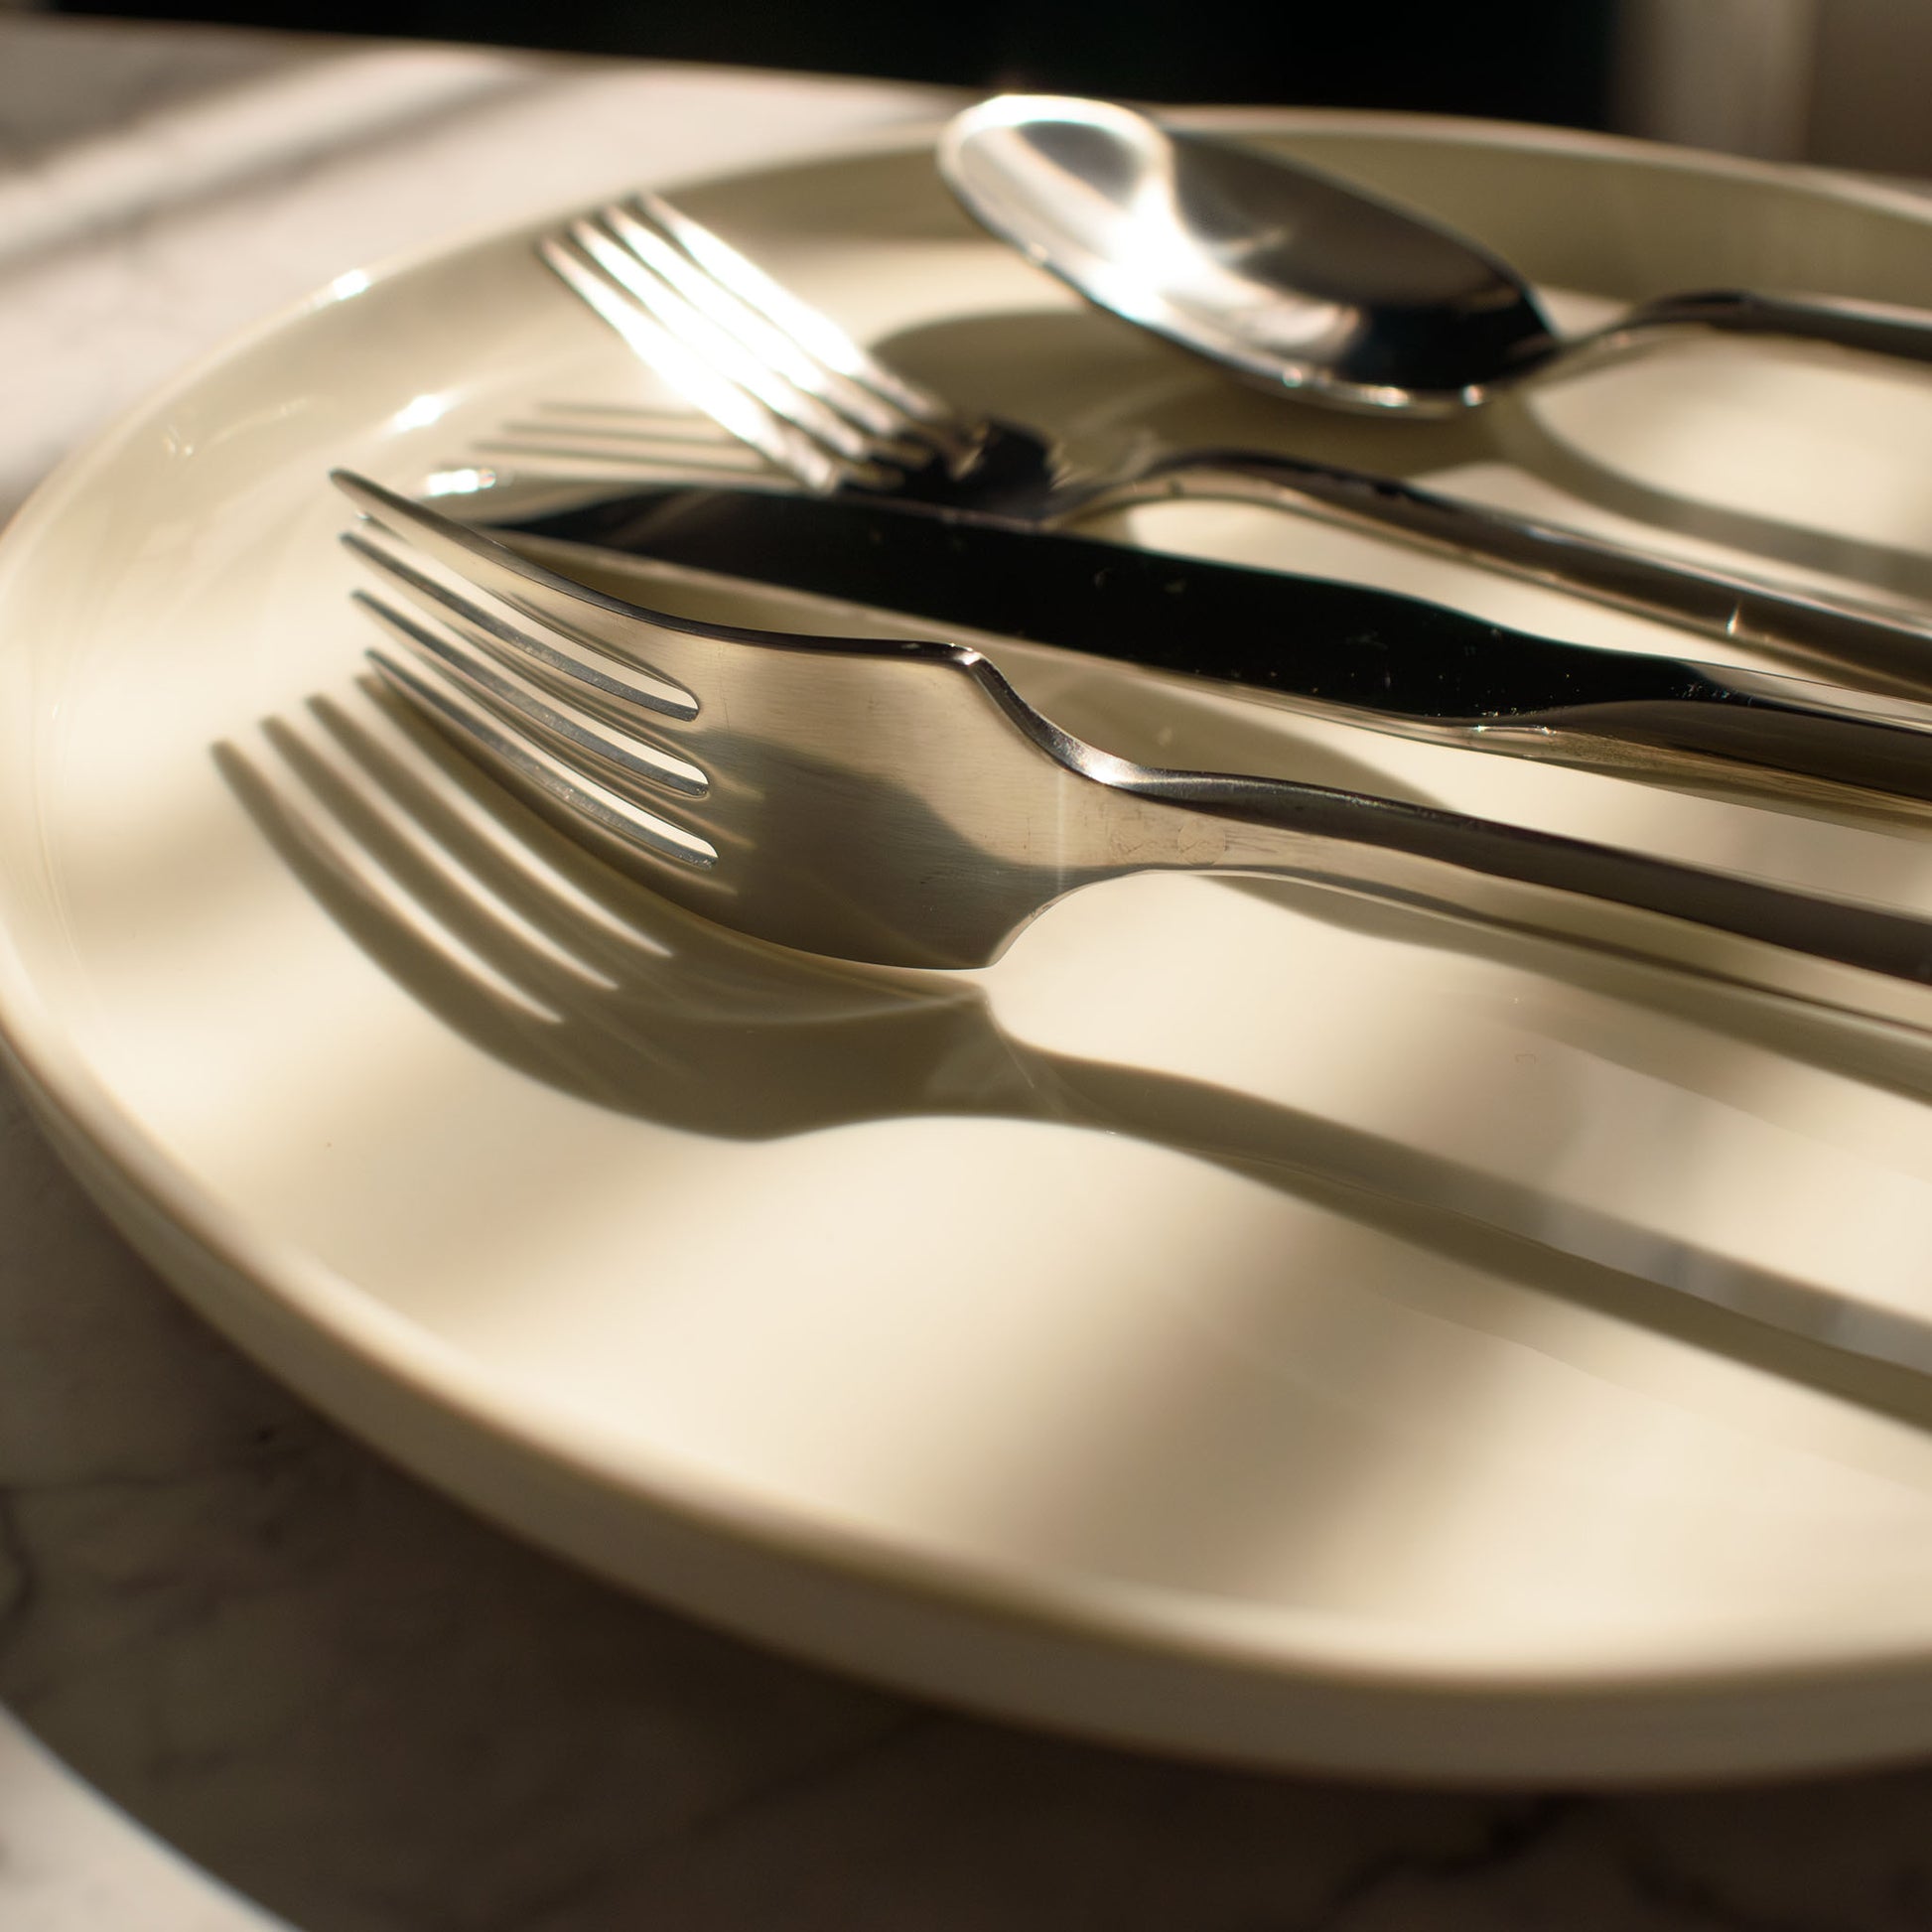 Polished silver hexagonal flatware on plate at golden hour sunset.